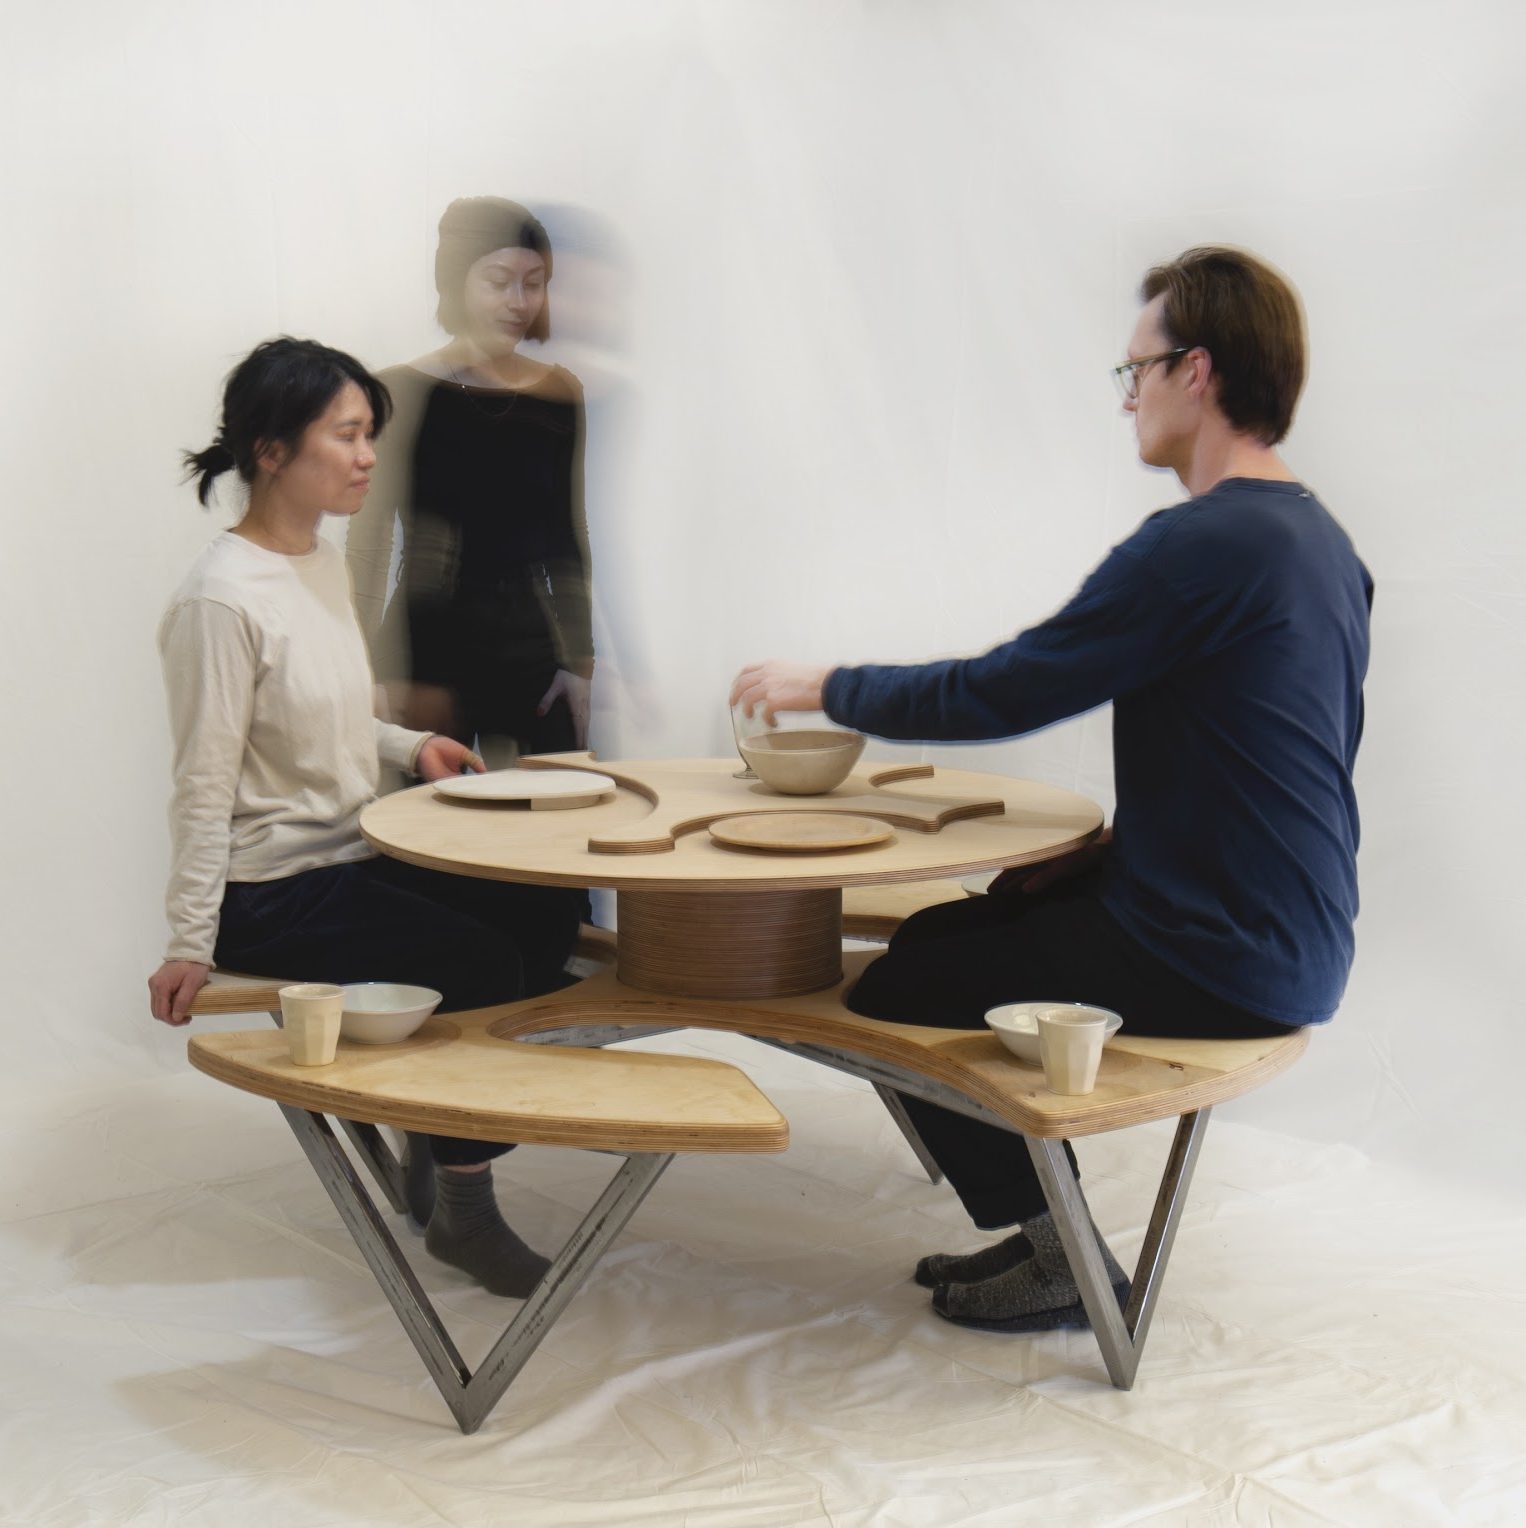 Artwork titled "Swivel Table" with people